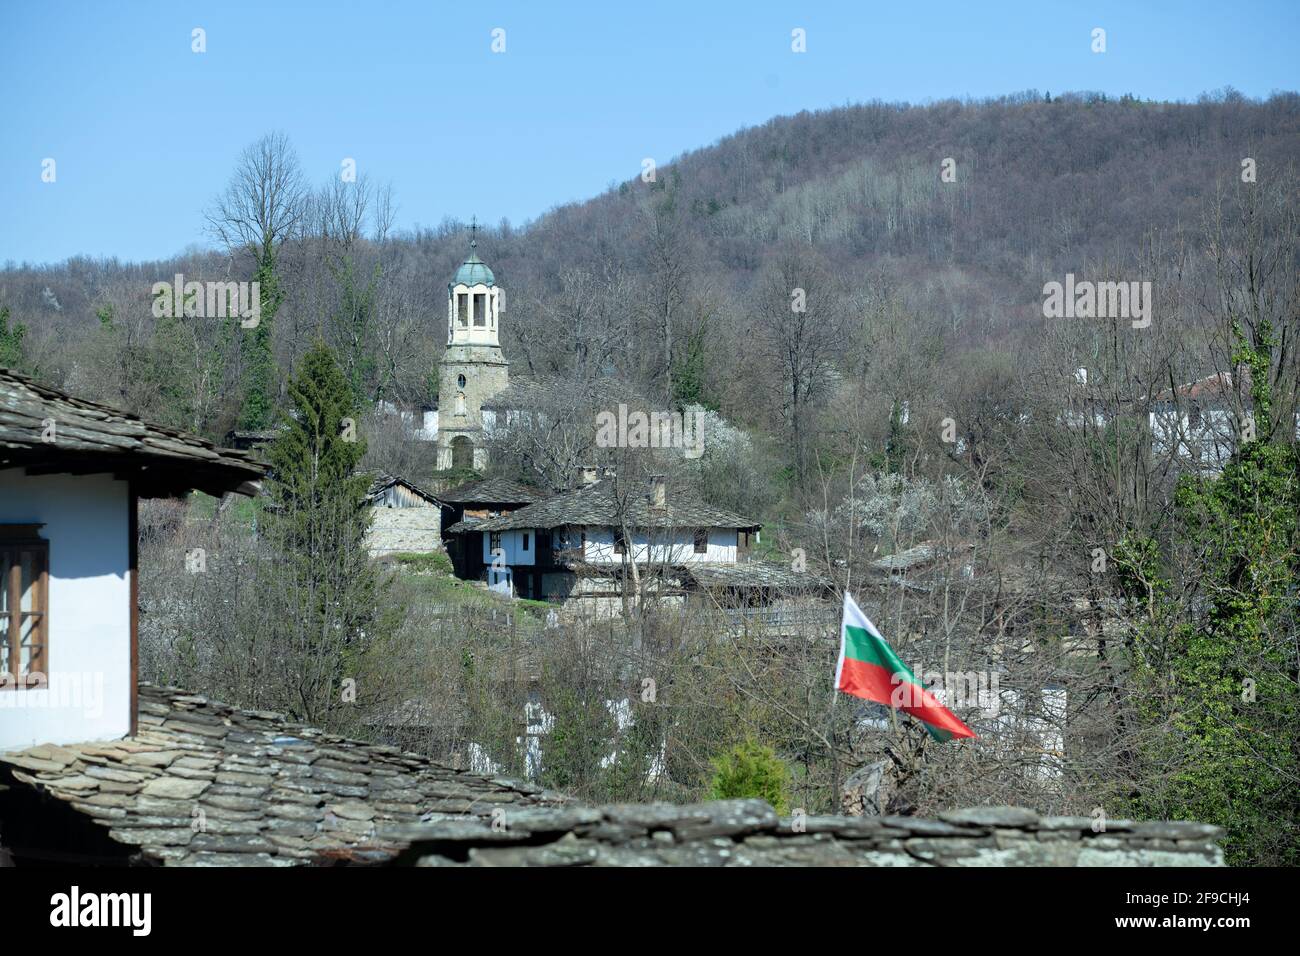 Bozhentsi, Bulgaria - Apr 10 2021: Overview towards St. Elijah's church in Bozhentsi during early spring Stock Photo